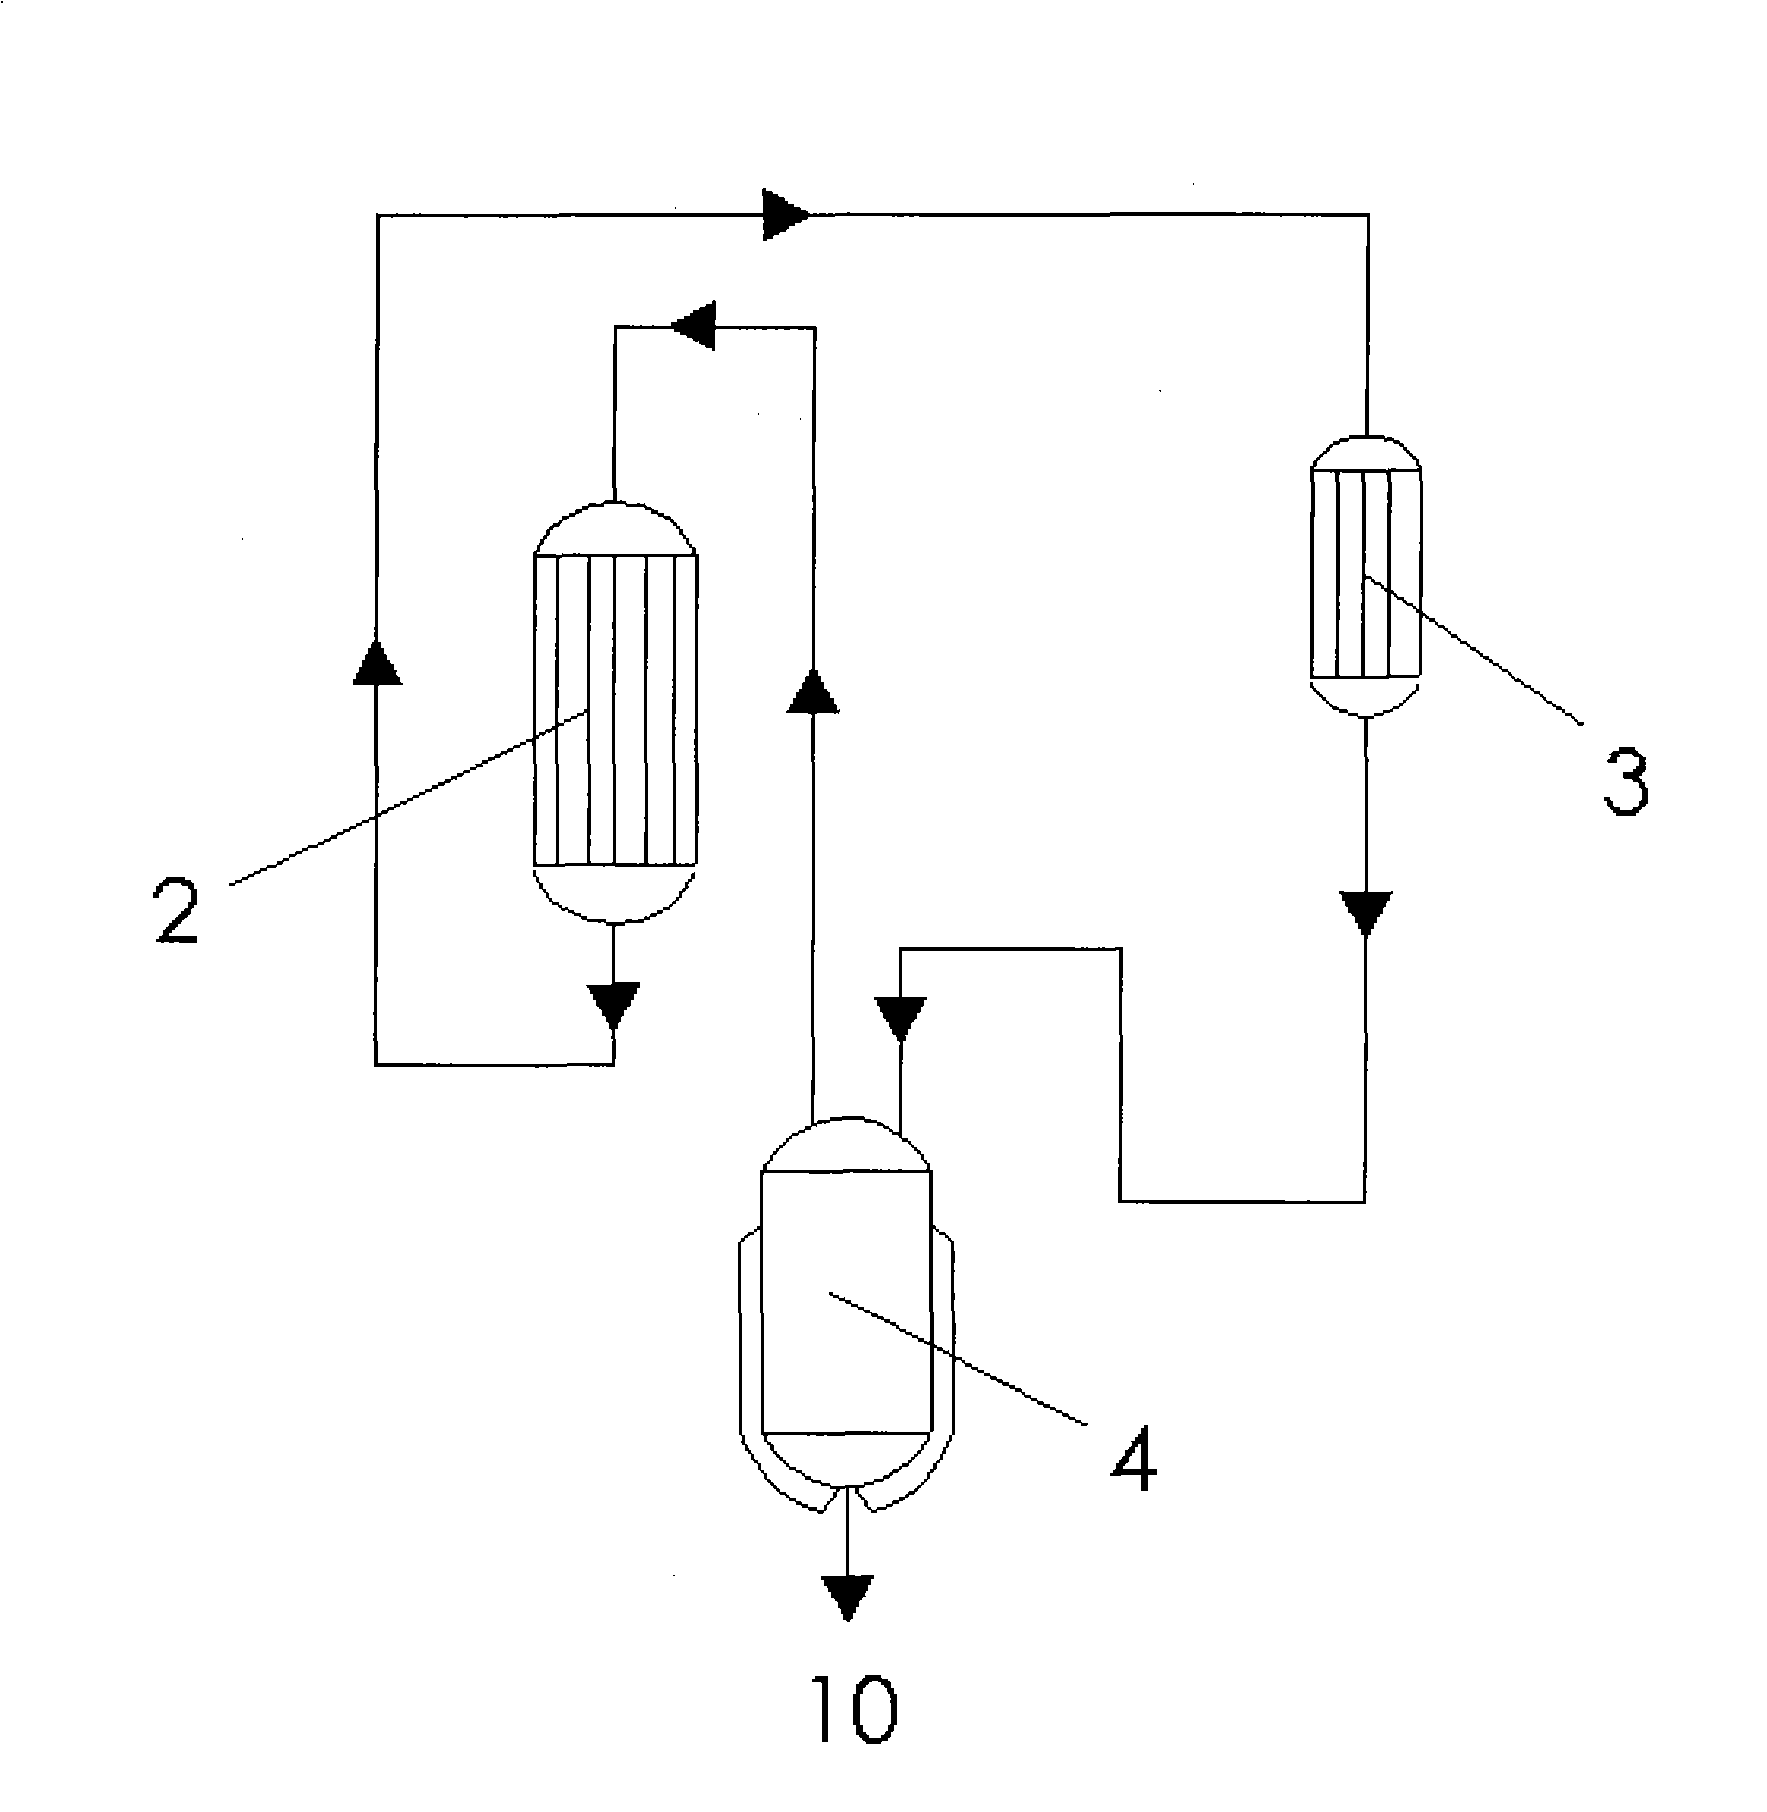 Liquid phase circulation method in synthesis of thionyl chloride